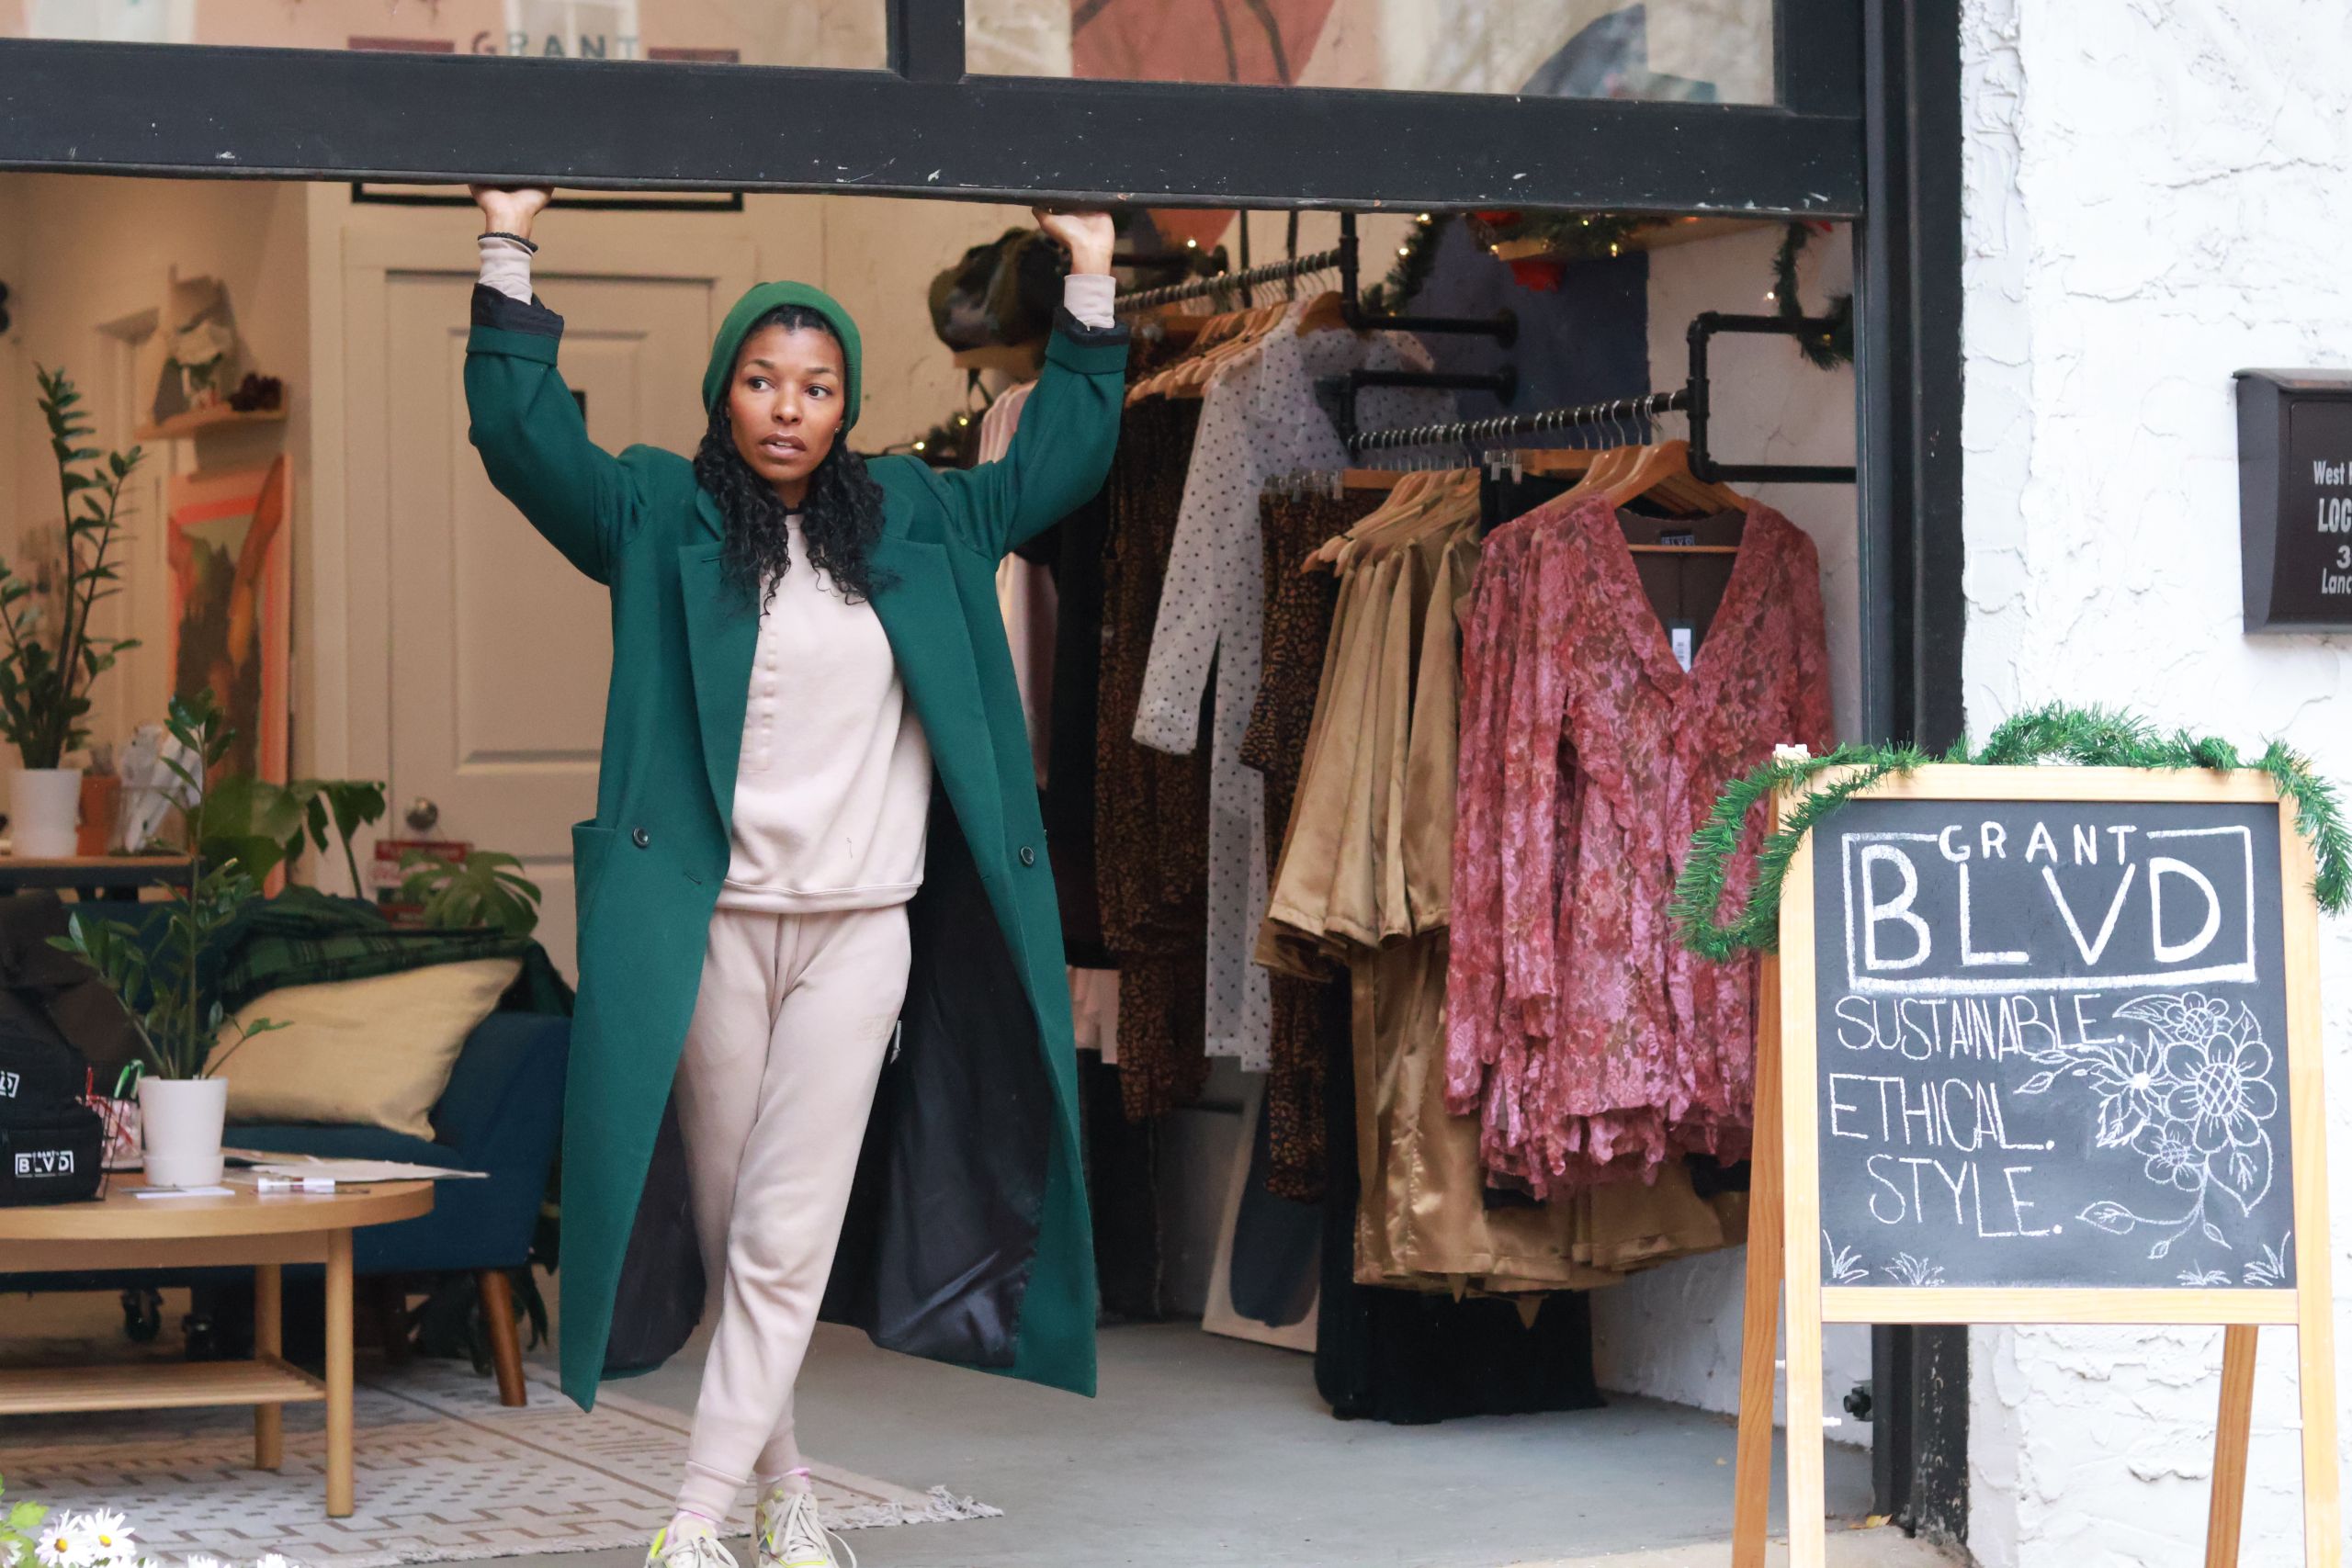 A photo of a light skin black woman with long black curly hair. she is wearing a dark green beanie and a dark green overcoat with a beige sweatsuit underneath. she is standing in front of her store next to a chalkboard sign that says Grant Boulevard.